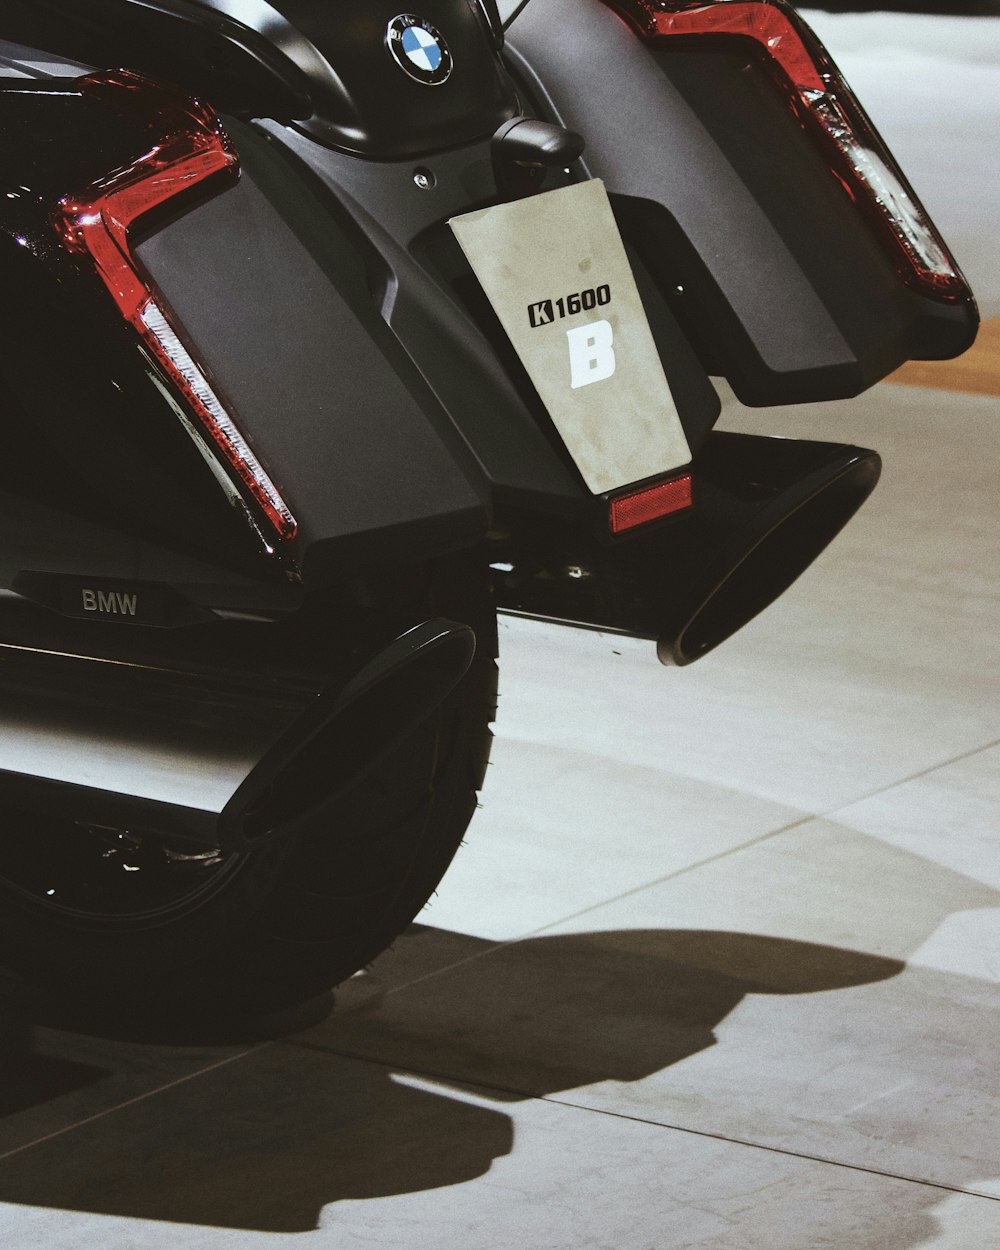 black and red automatic scooter